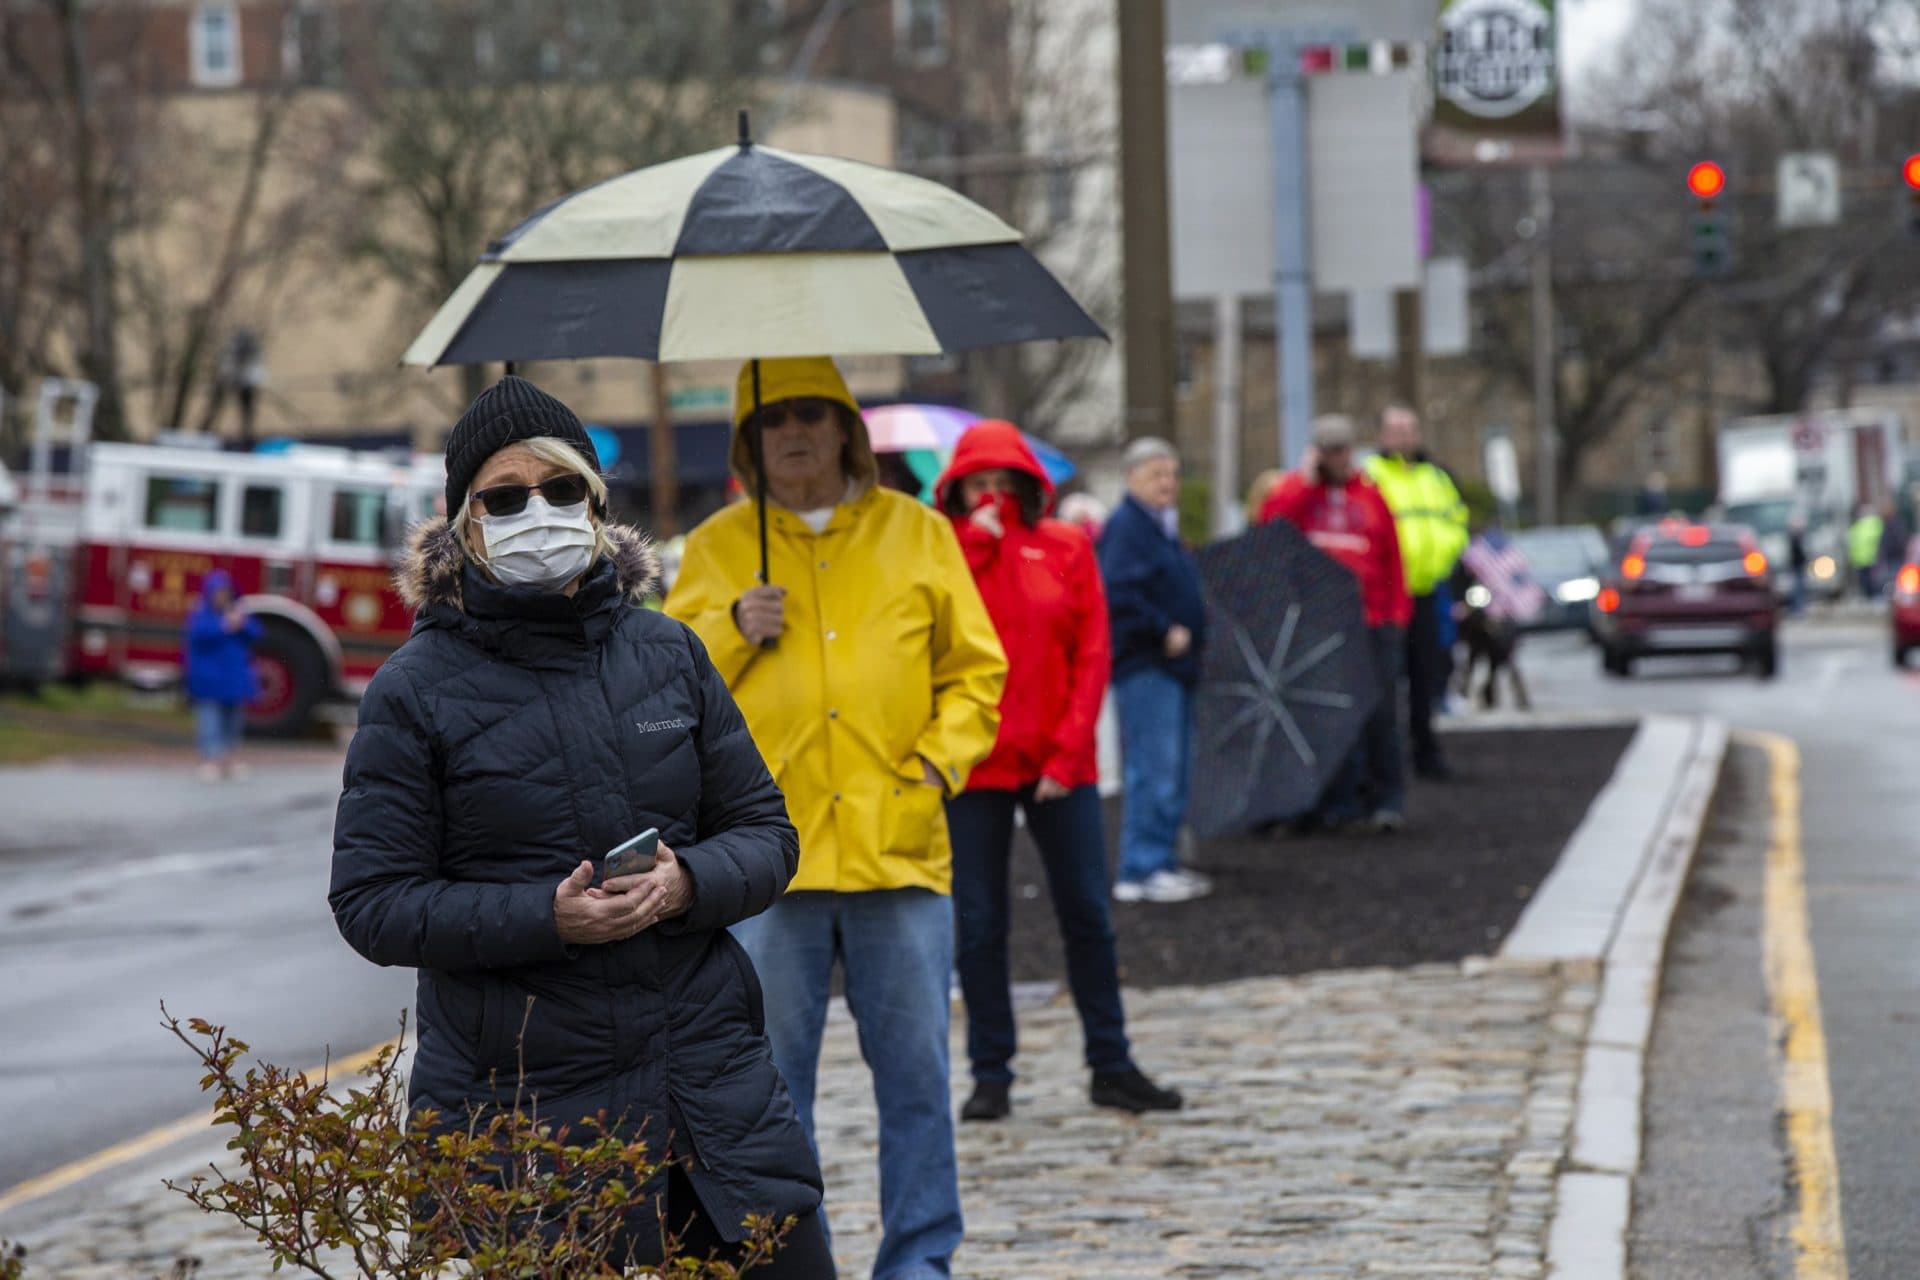 People lined the walkways of Mass. Ave. in Arlington center to await the funeral procession for Mary Foley. (Jesse Costa/WBUR)